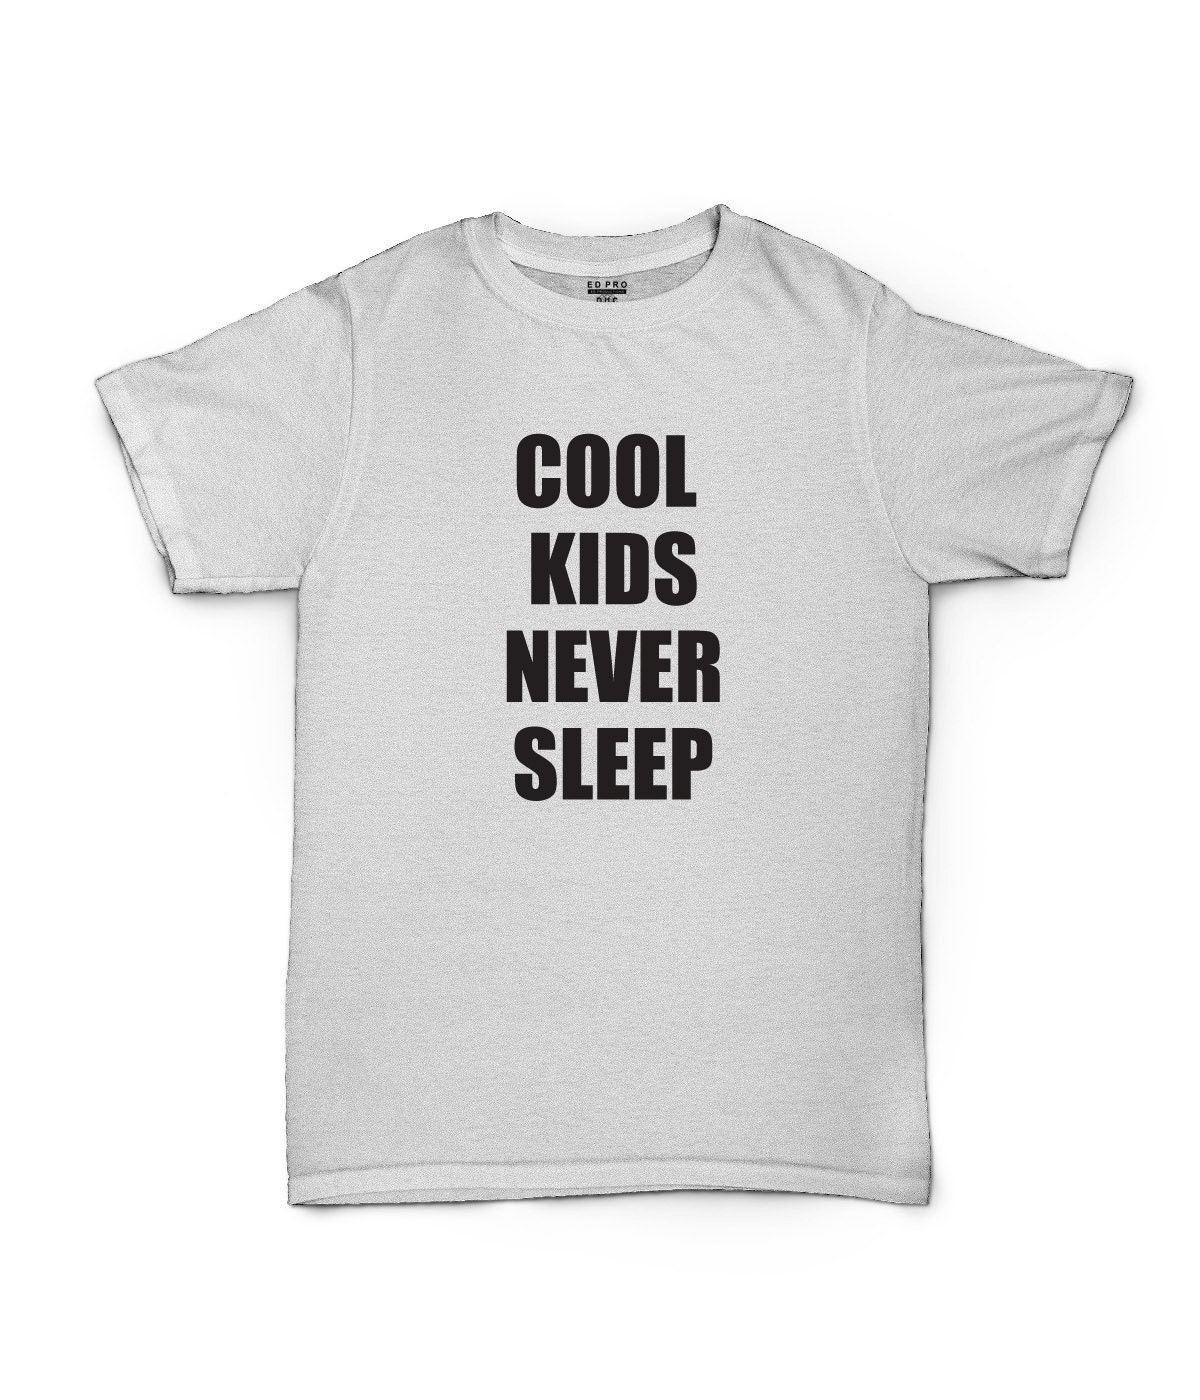 SALE Cool Kids Never Sleep Eco-Friendly by edproductions on Etsy